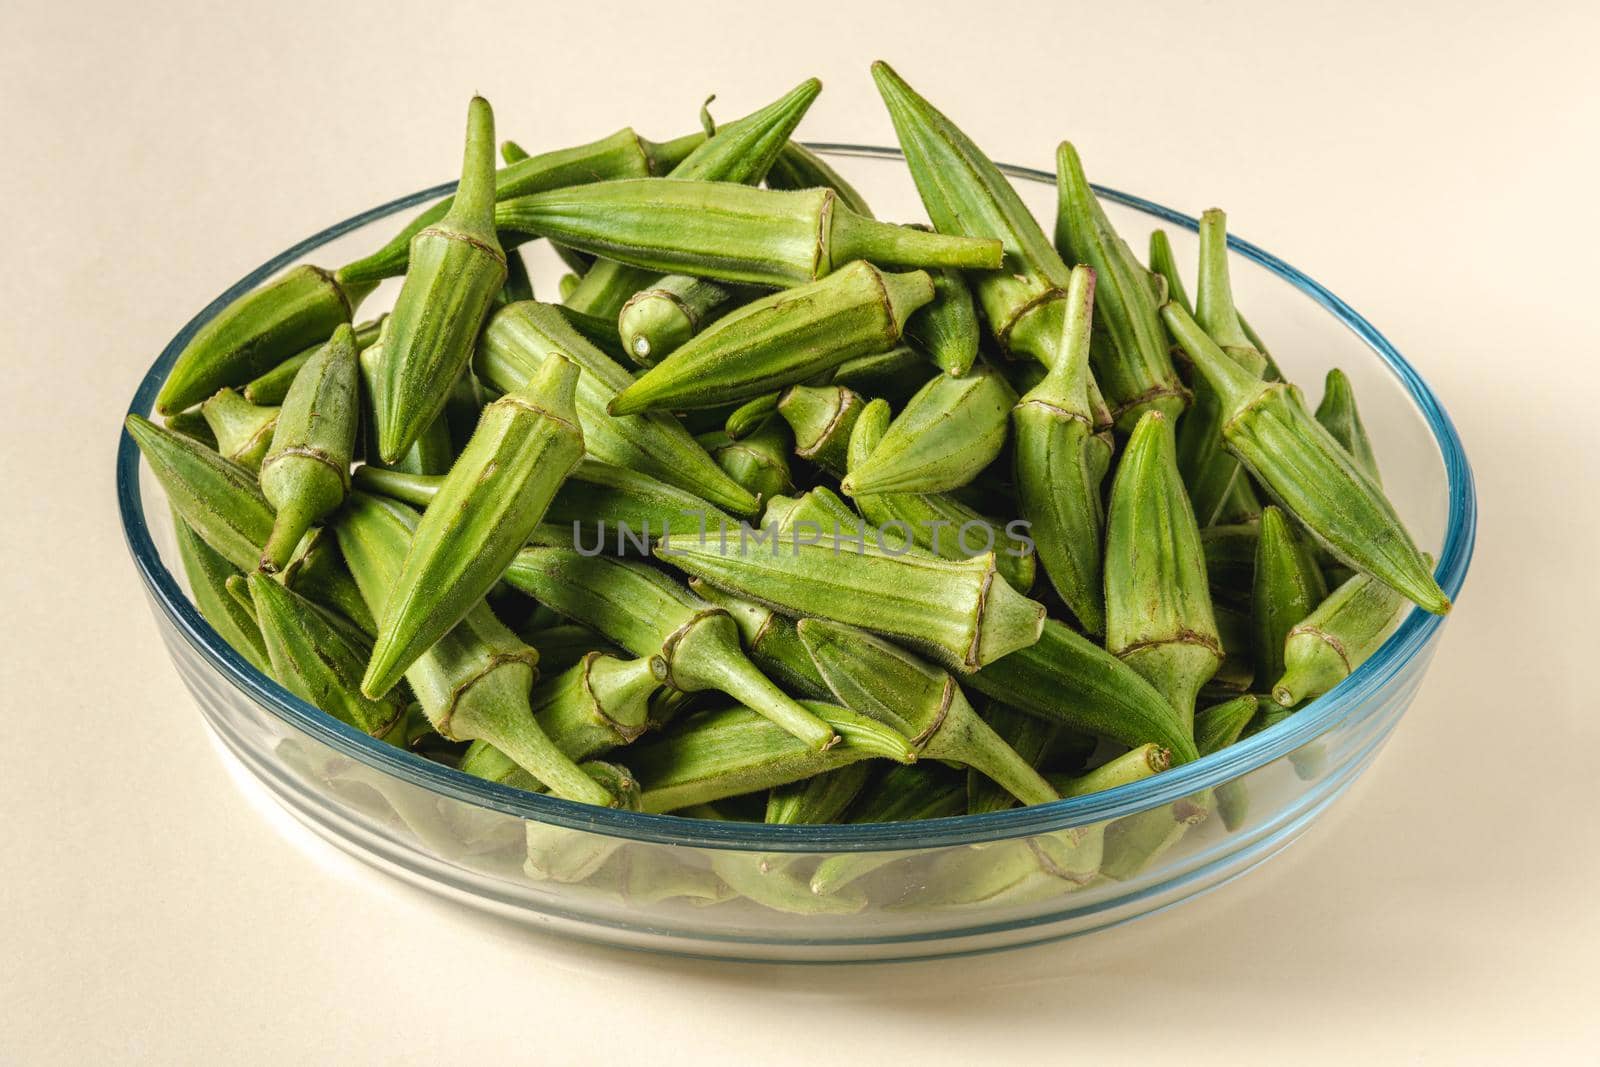 Fresh raw okra in a glass bowl. Healthy eating concept by Sonat